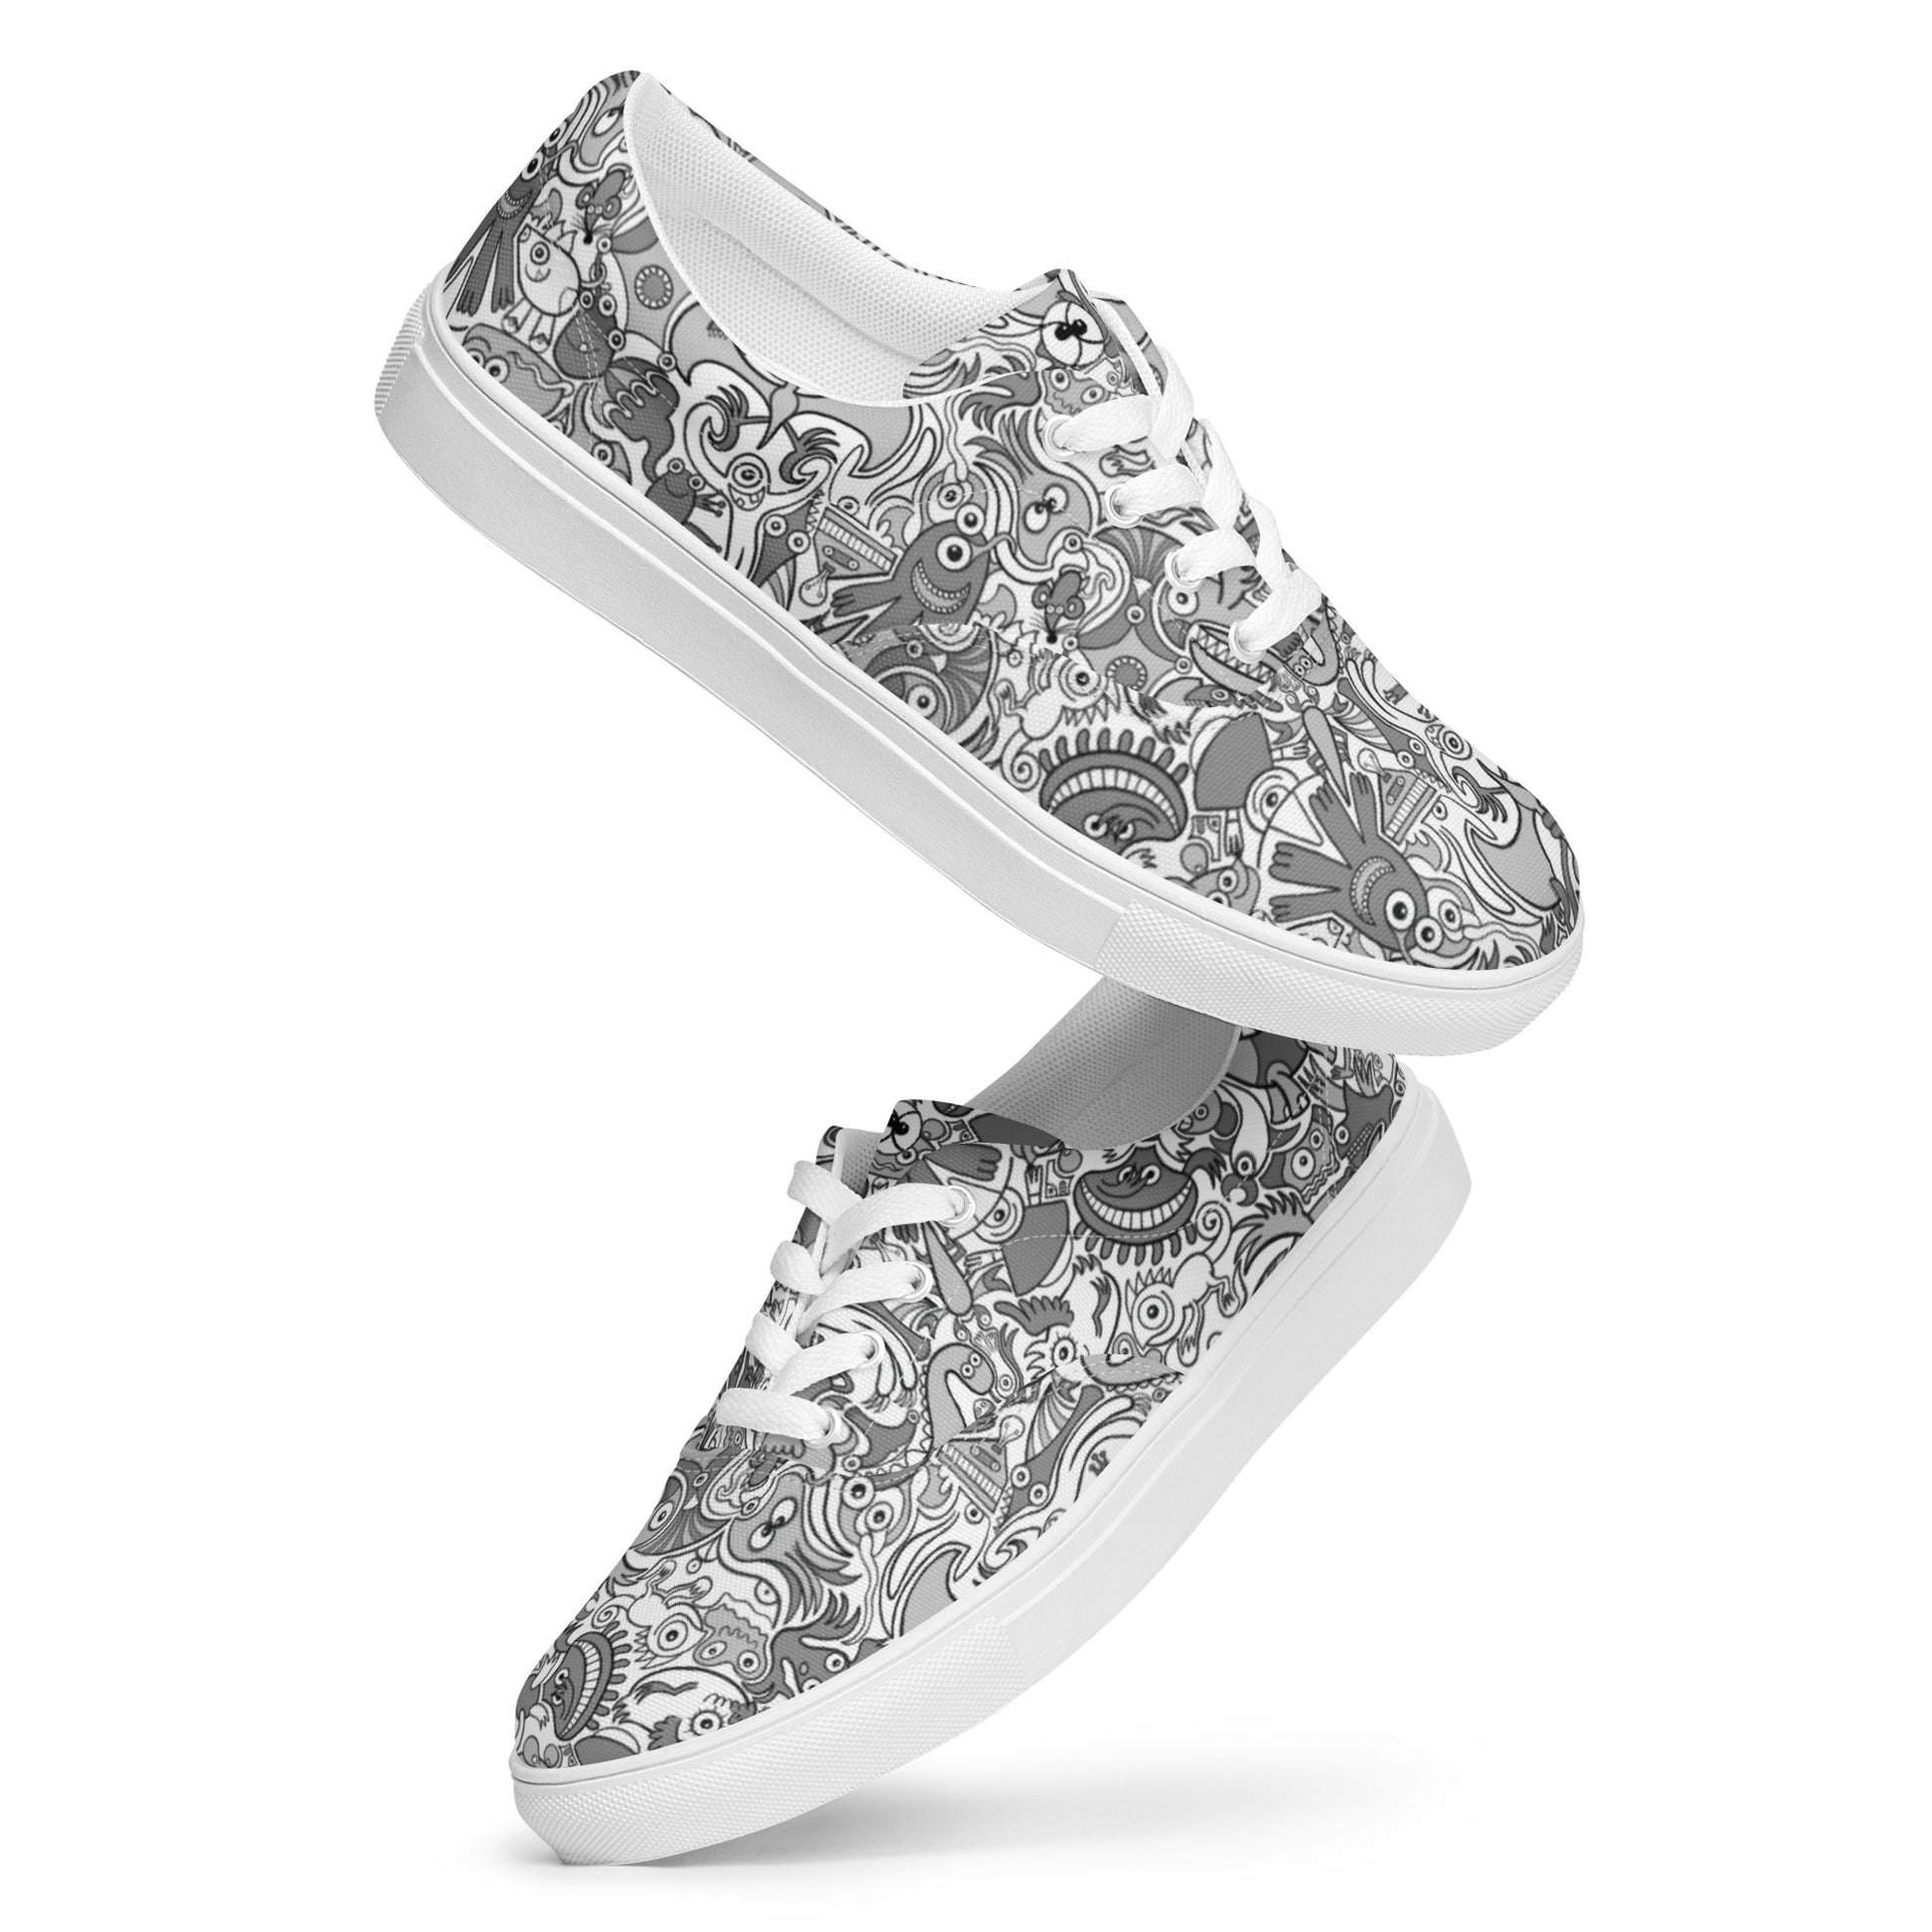 Awesome doodle creatures in a variety of tones of gray Men’s lace-up canvas shoes. Playing with shoes